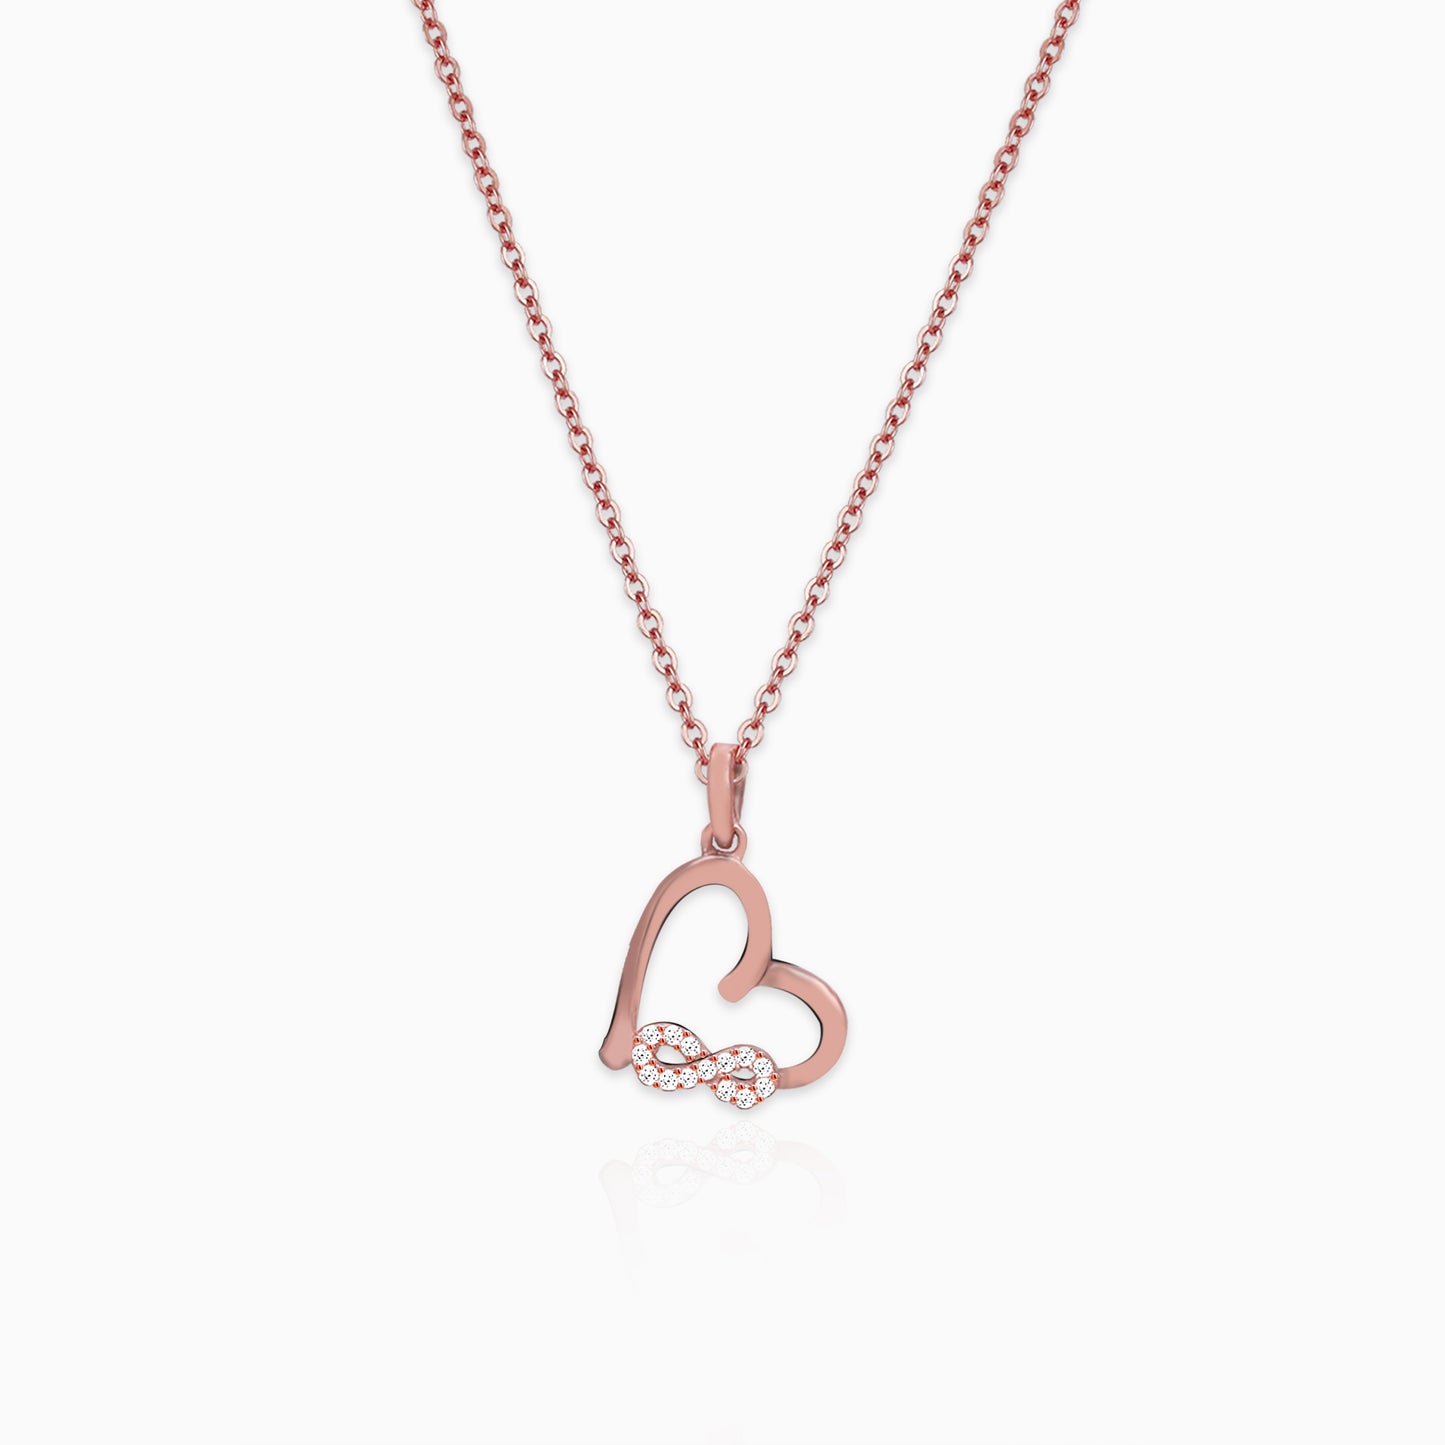 Rose Gold Infinity Heart Pendant with Link Chain